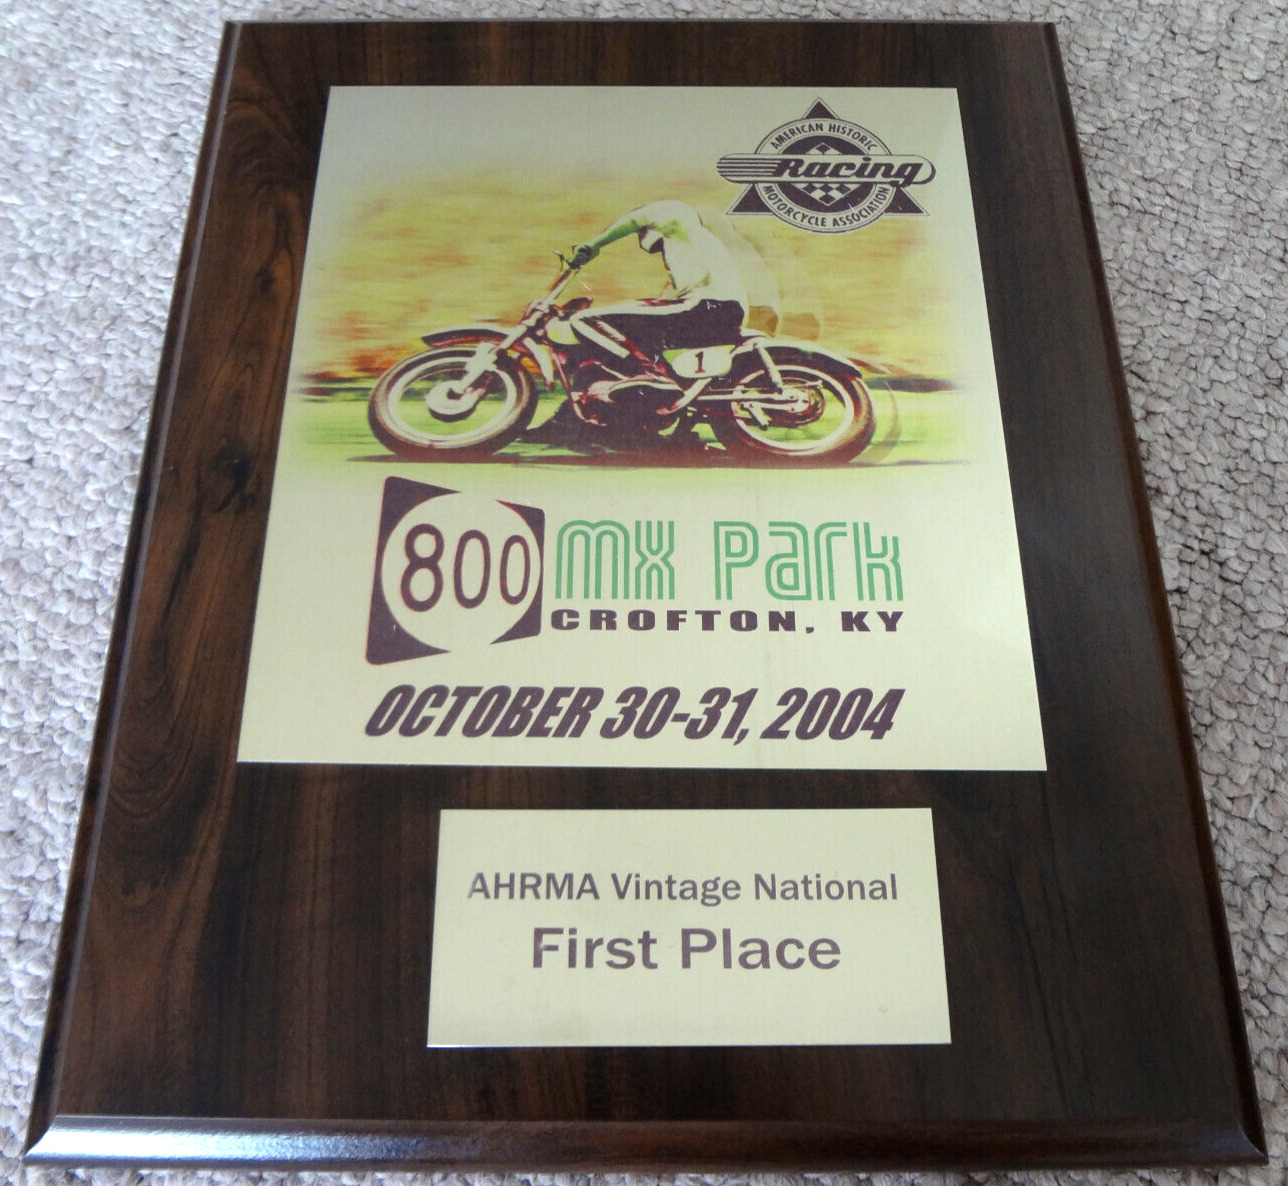 AHRMA VINTAGE NATIONAL MOTORCYCLE AWARD TROPHY PLAQUE HIGH POINT CROFTON KY 2004